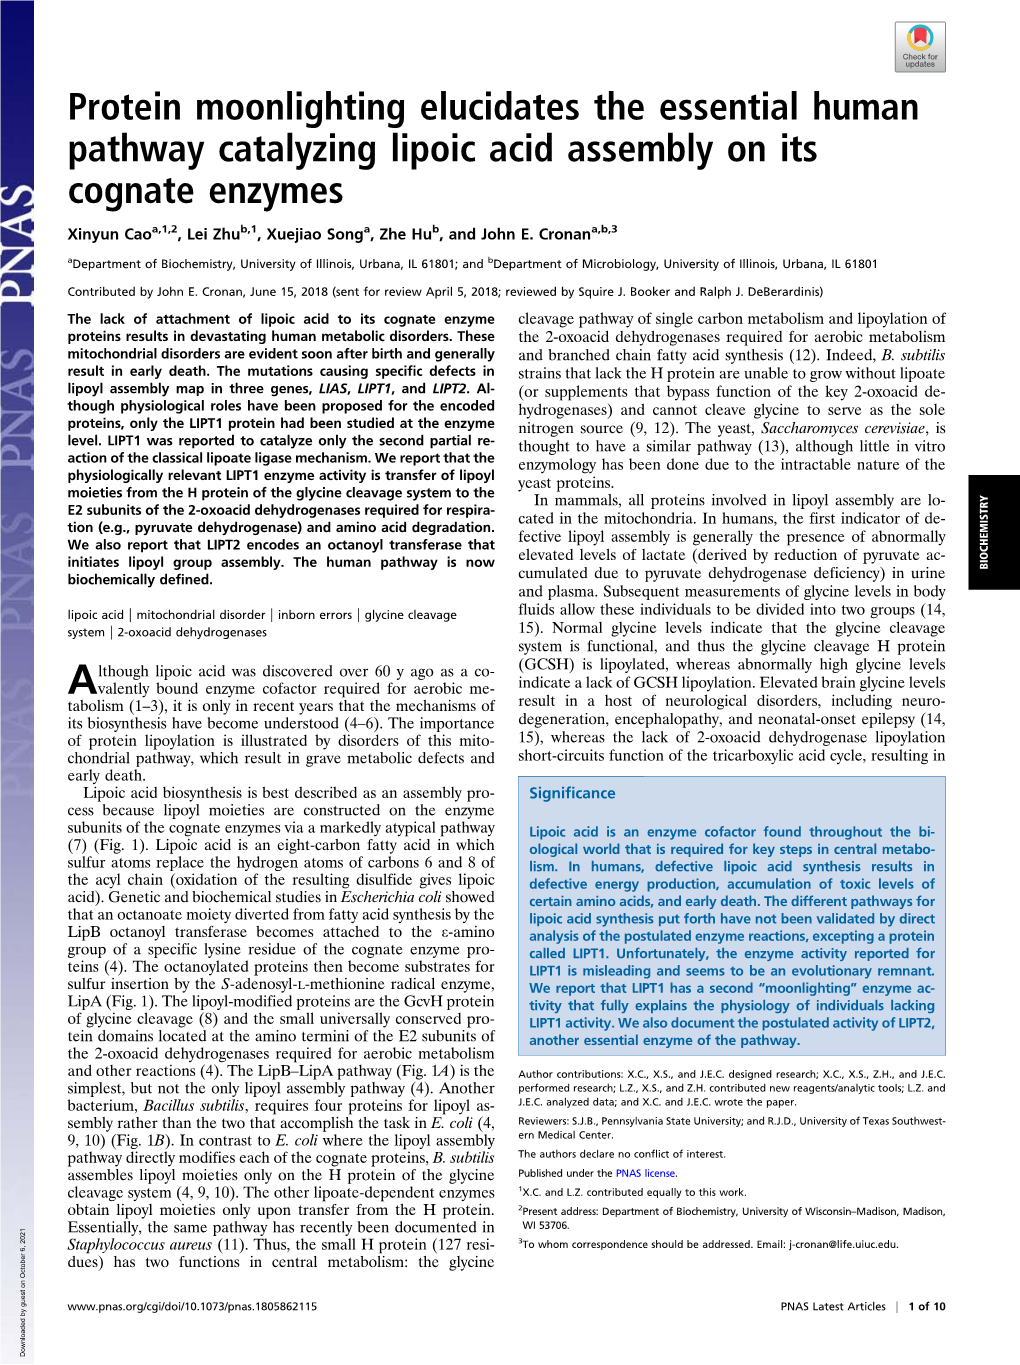 Protein Moonlighting Elucidates the Essential Human Pathway Catalyzing Lipoic Acid Assembly on Its Cognate Enzymes